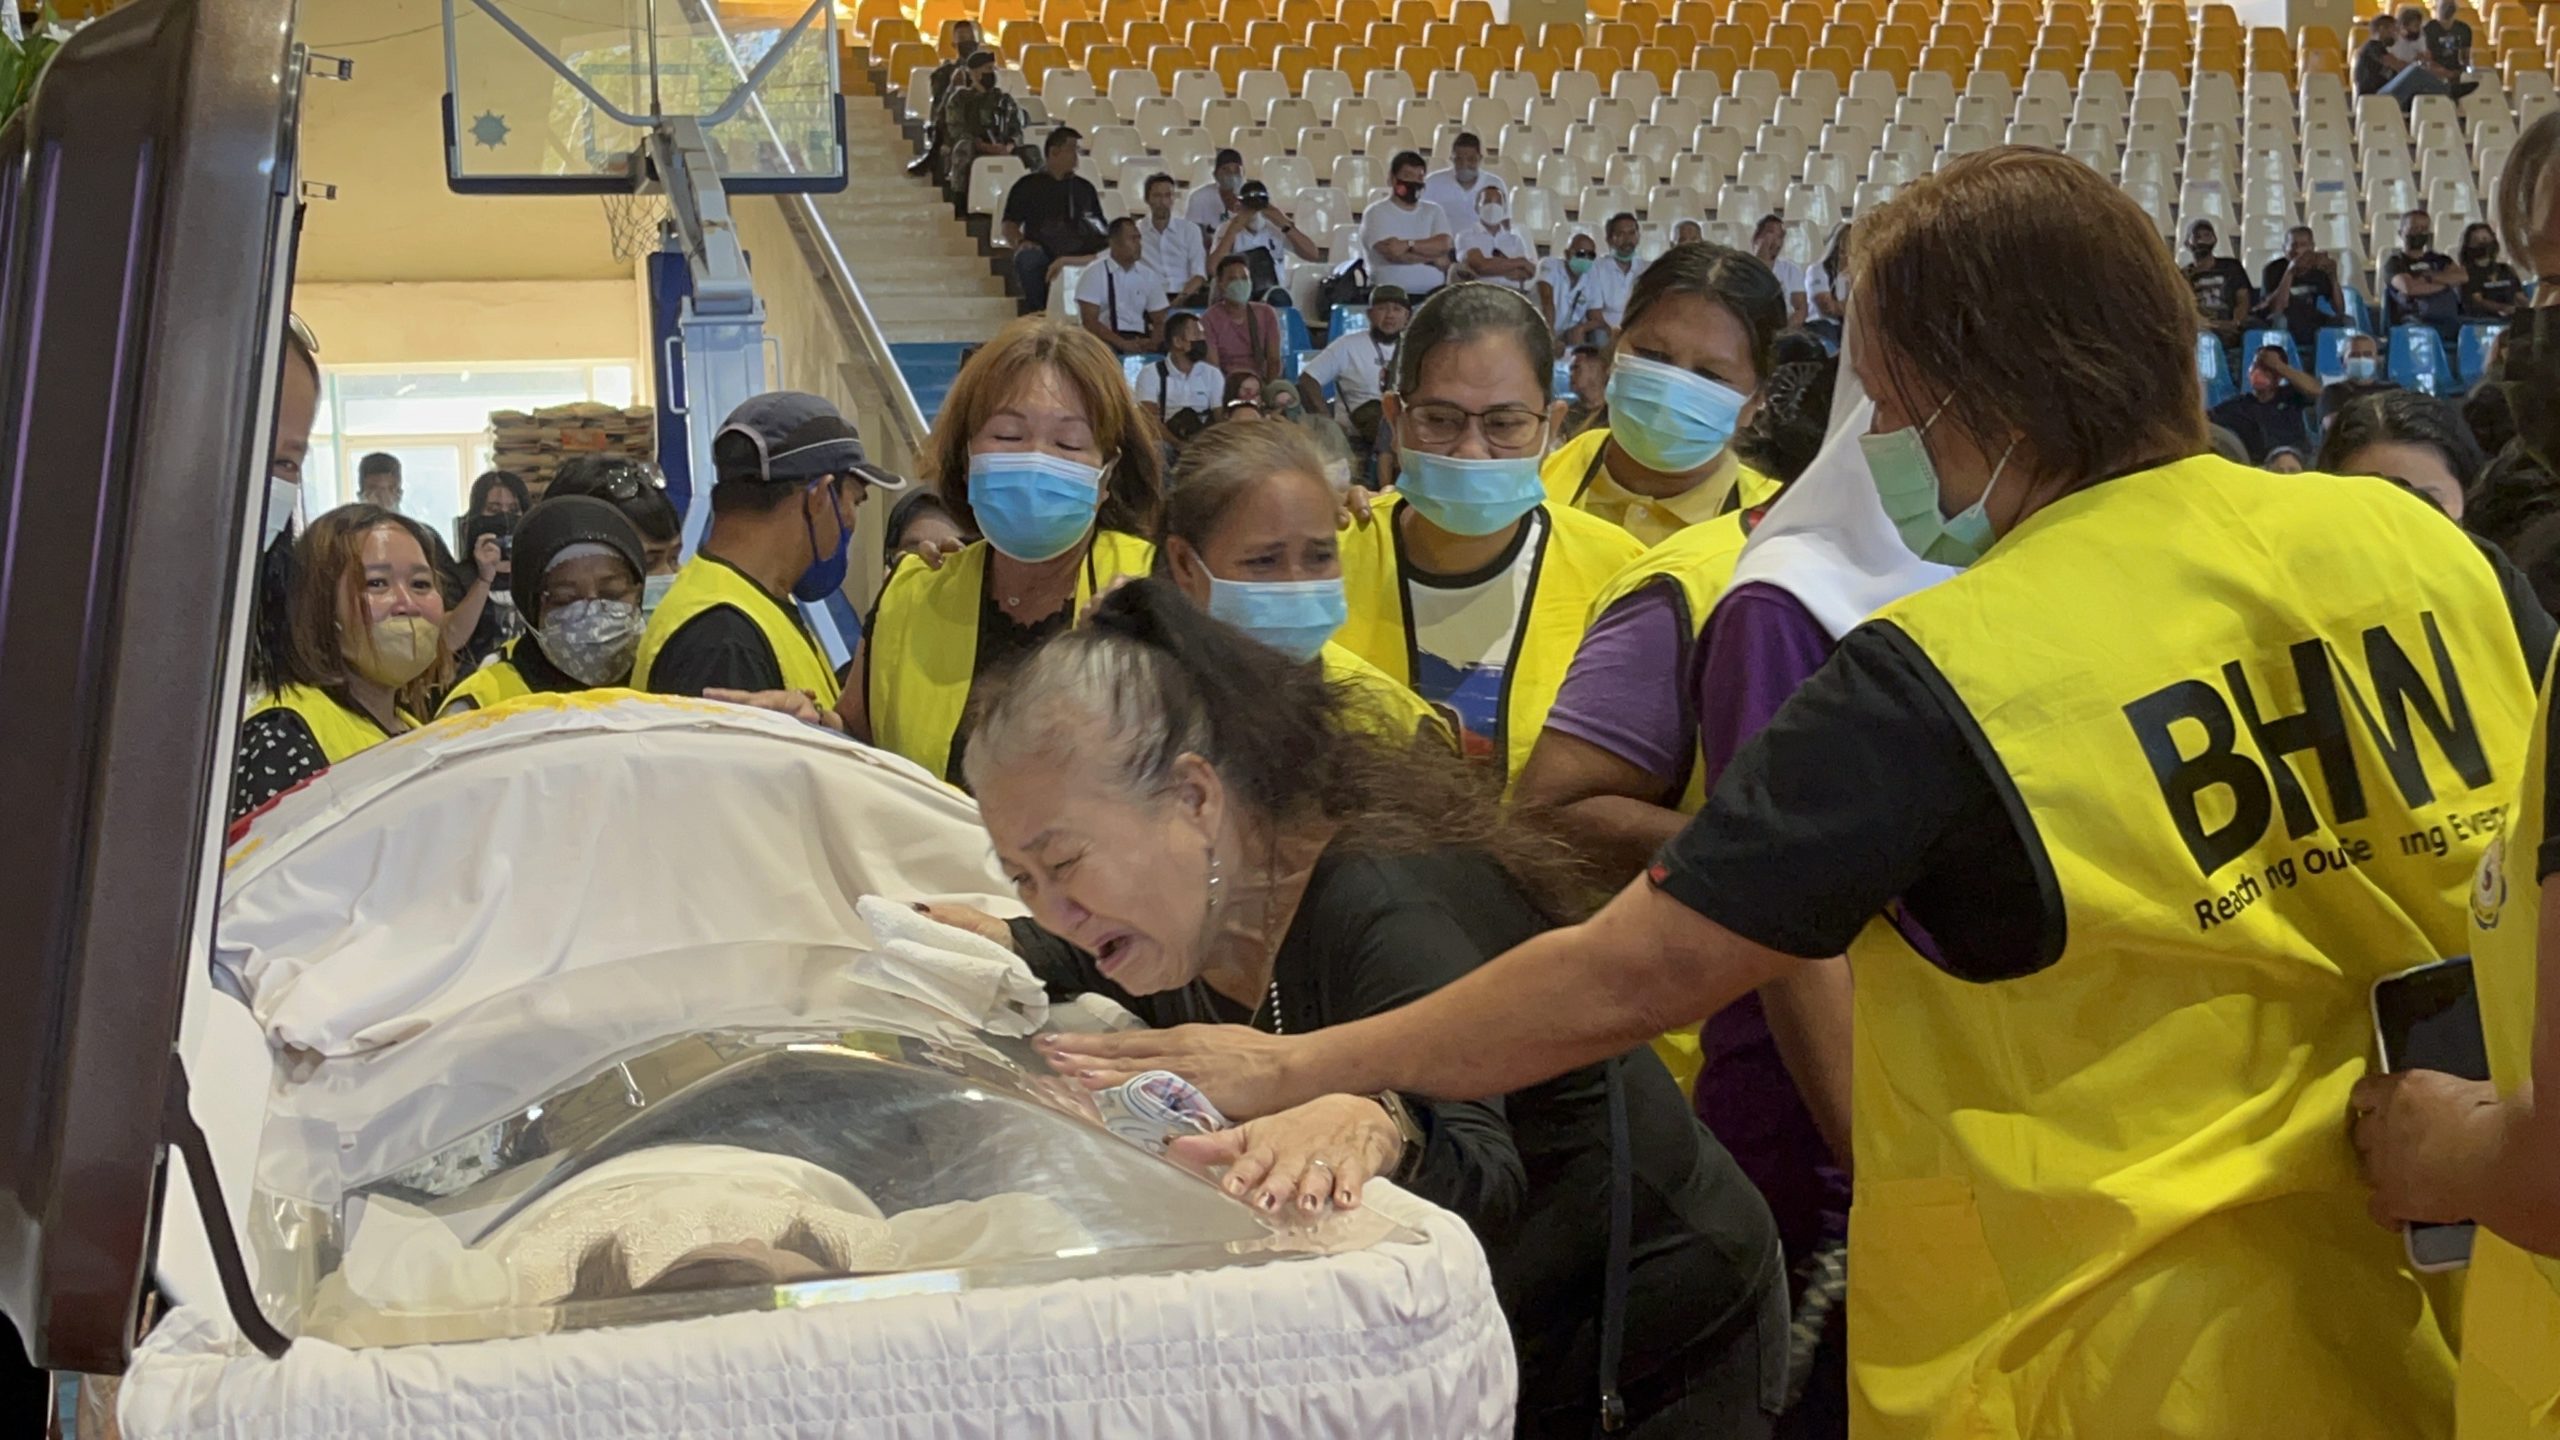 Fe Anglingco a BHW member, wept as she was trying to hug the coffin of slain former Lamitan City mayor Rosita Furigay